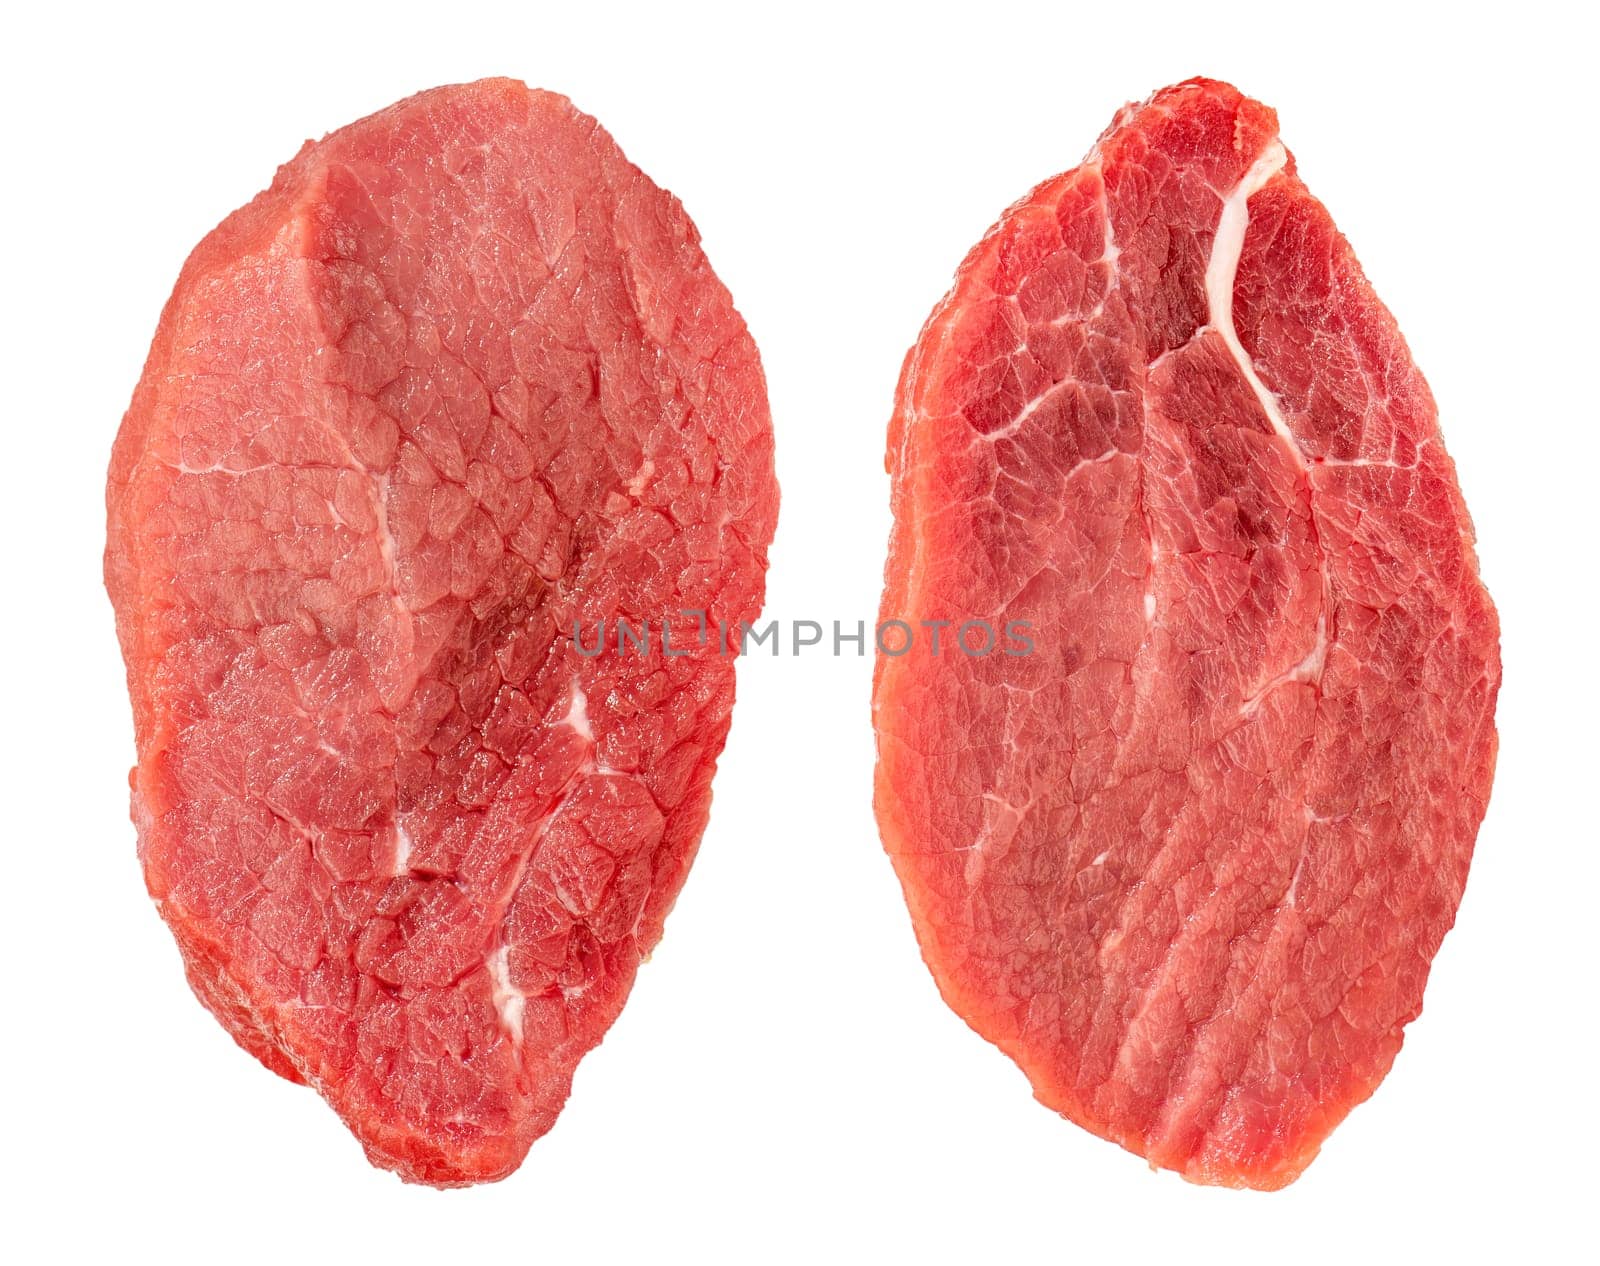 Two pieces of beef meat. Large pieces of beef with thin layers of fat, isolated on a white background. The texture of beef meat close-up, for inserting into a design, project or advertising banner